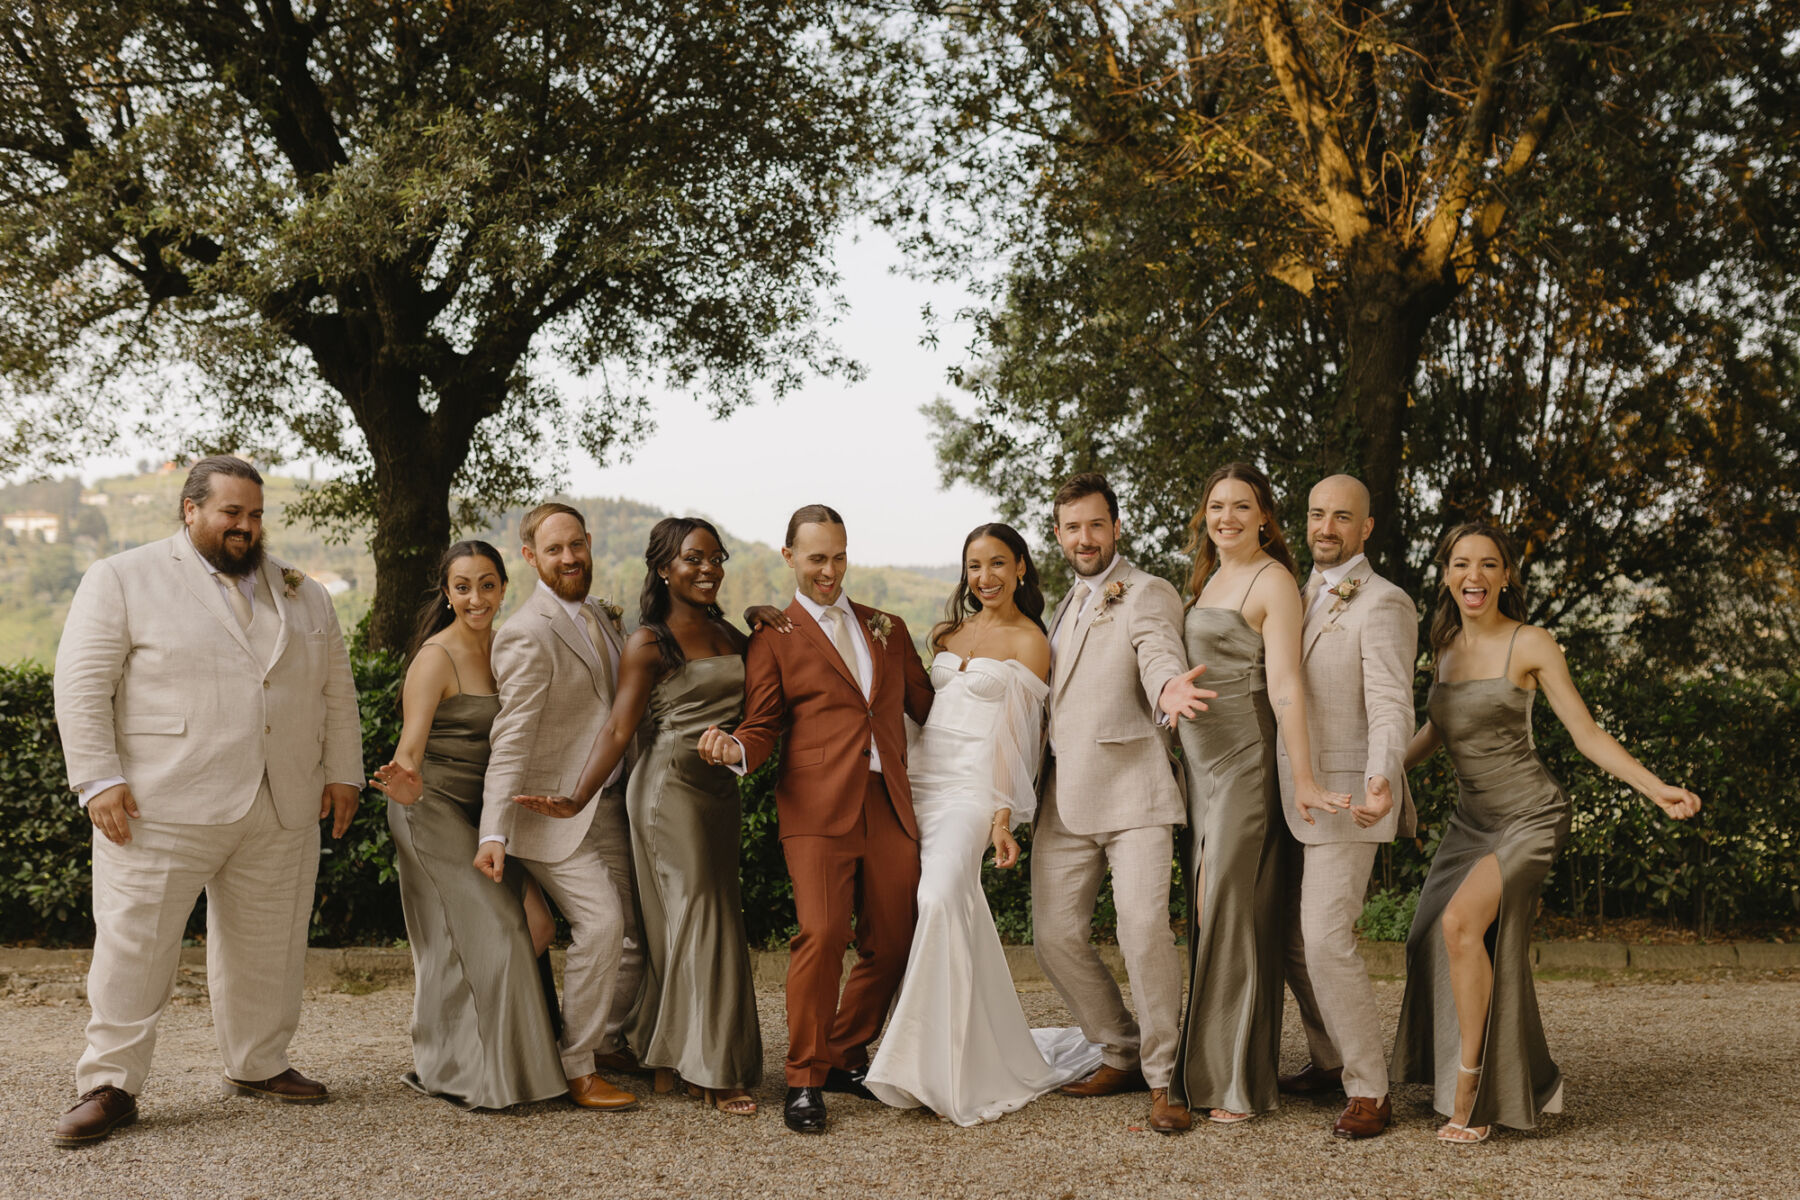 A playful line up at a modern Italian wedding. In the centre, the bride and groom - she wears an Alena Leena wedding dress with detachable tulle sleeves, groom wears a dark orange Paul Smith suit. The bridesmaids wear light green satin dresses by Bec & Bridge and teh groomsmen wear pale suits.